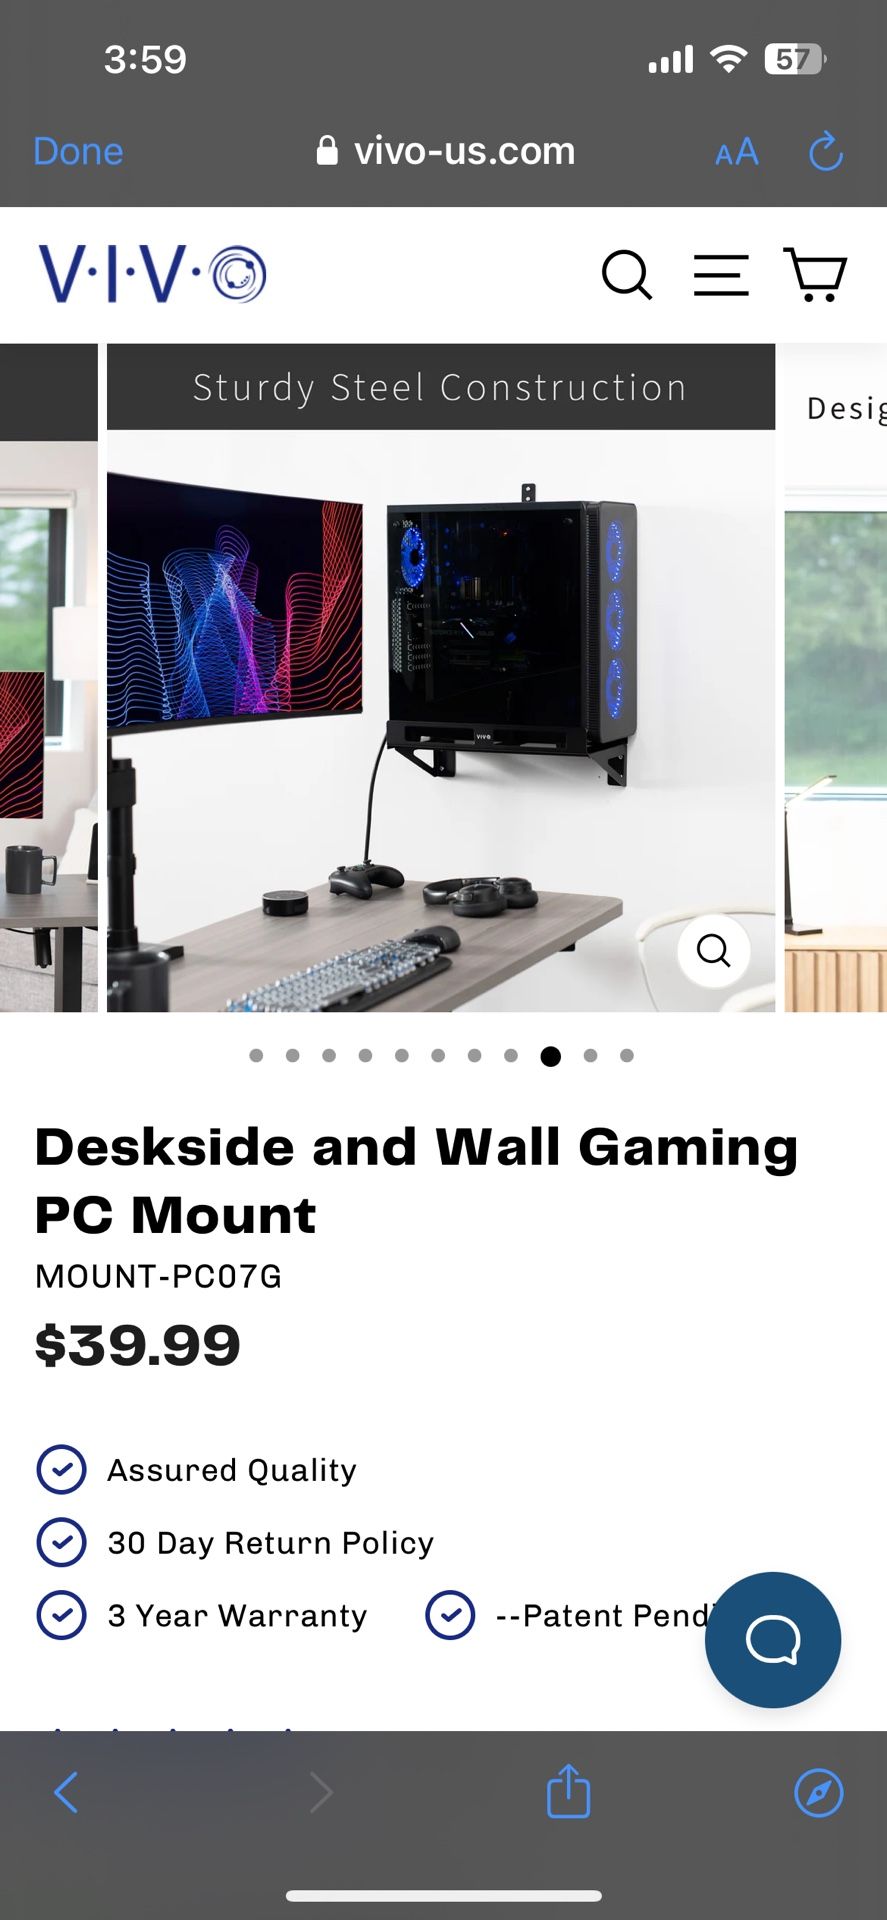 Deskside and Wall Gaming PC Mount